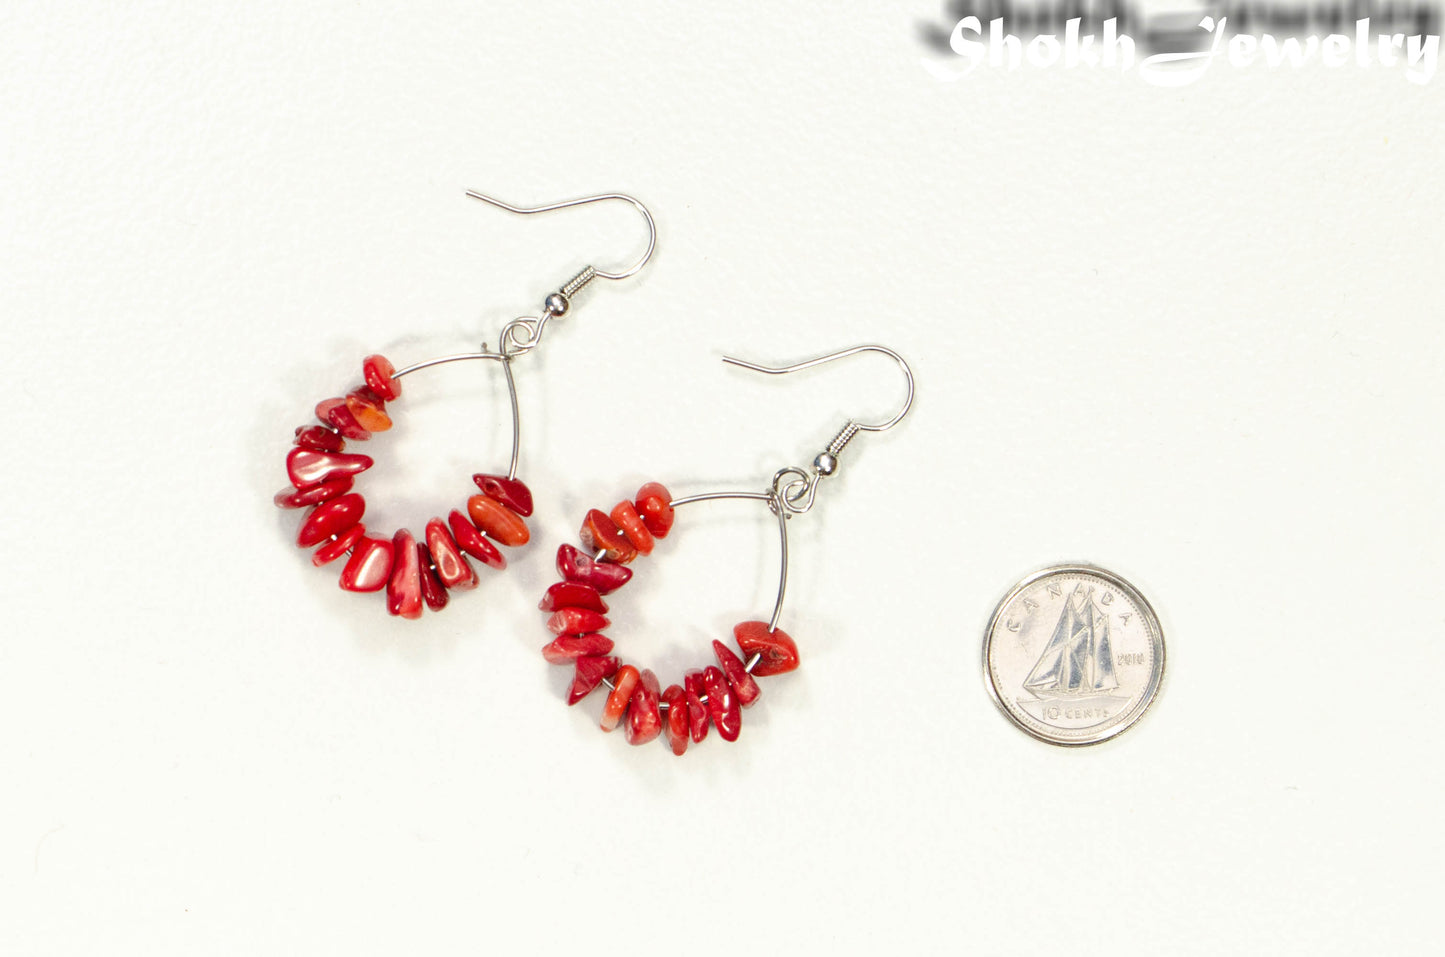 Natural Red Coral Crystal Chip Earrings beside a dime.